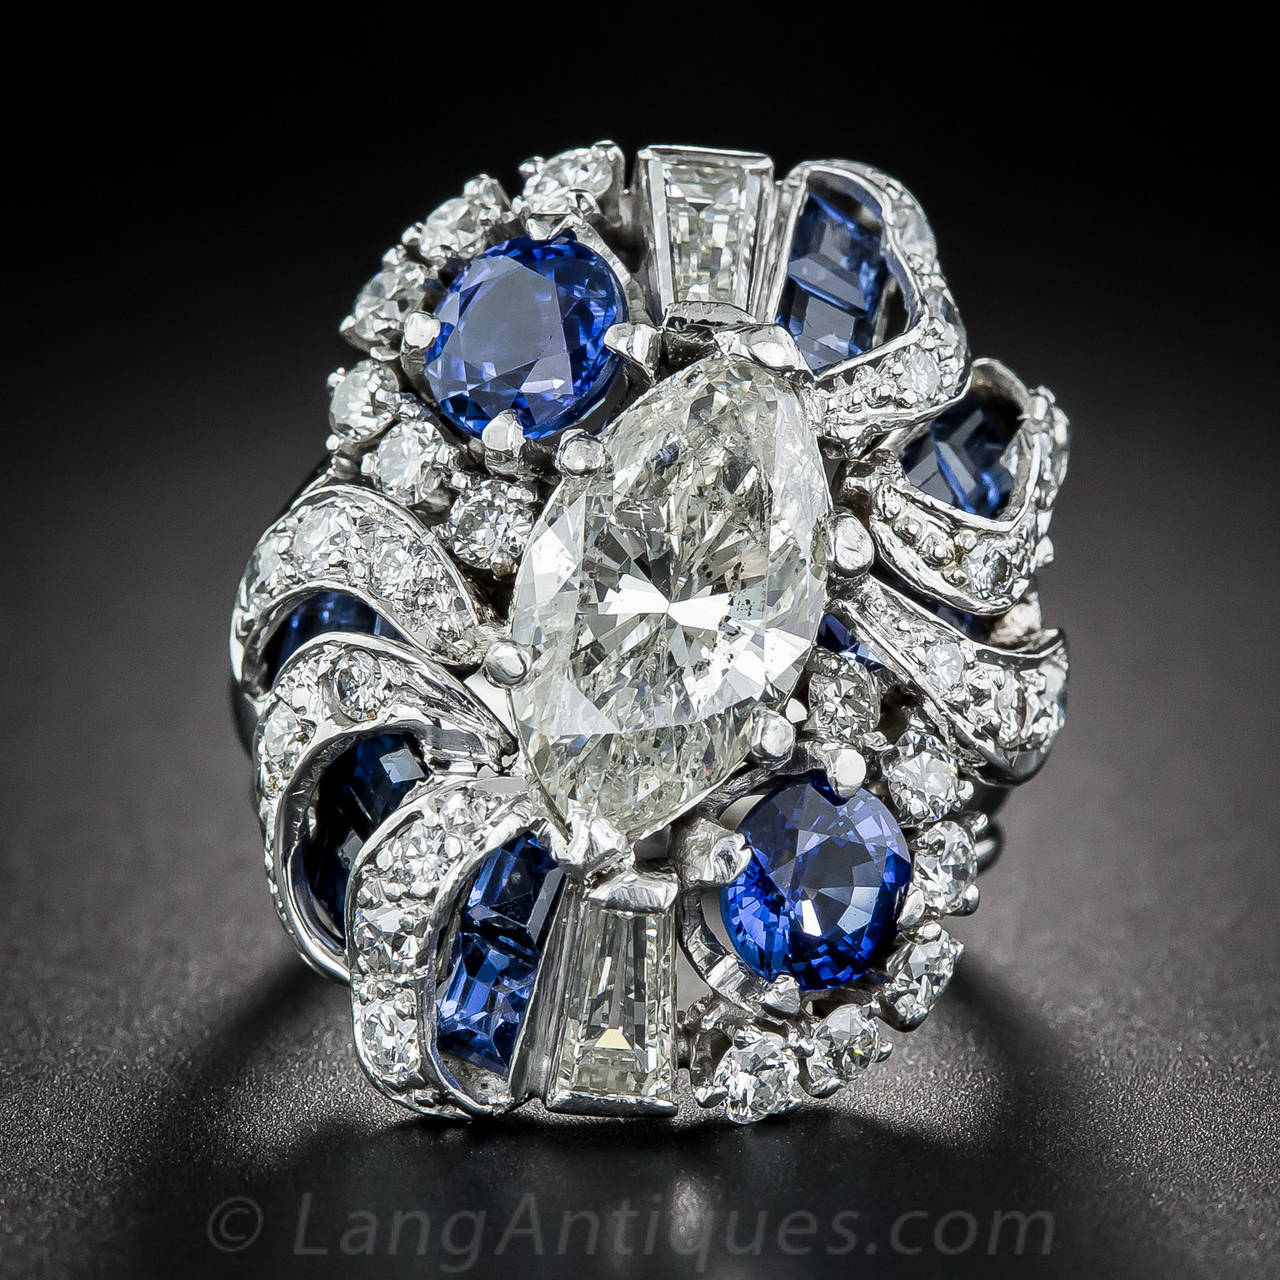 Make a sparkling statement with this 1 inch long, unique and impressive platinum, diamond and sapphire cocktail ring, starring a 3.00 carat marquise-cut diamond. The shining stone is enveloped in undulating swirls and ribbons of diamonds and is